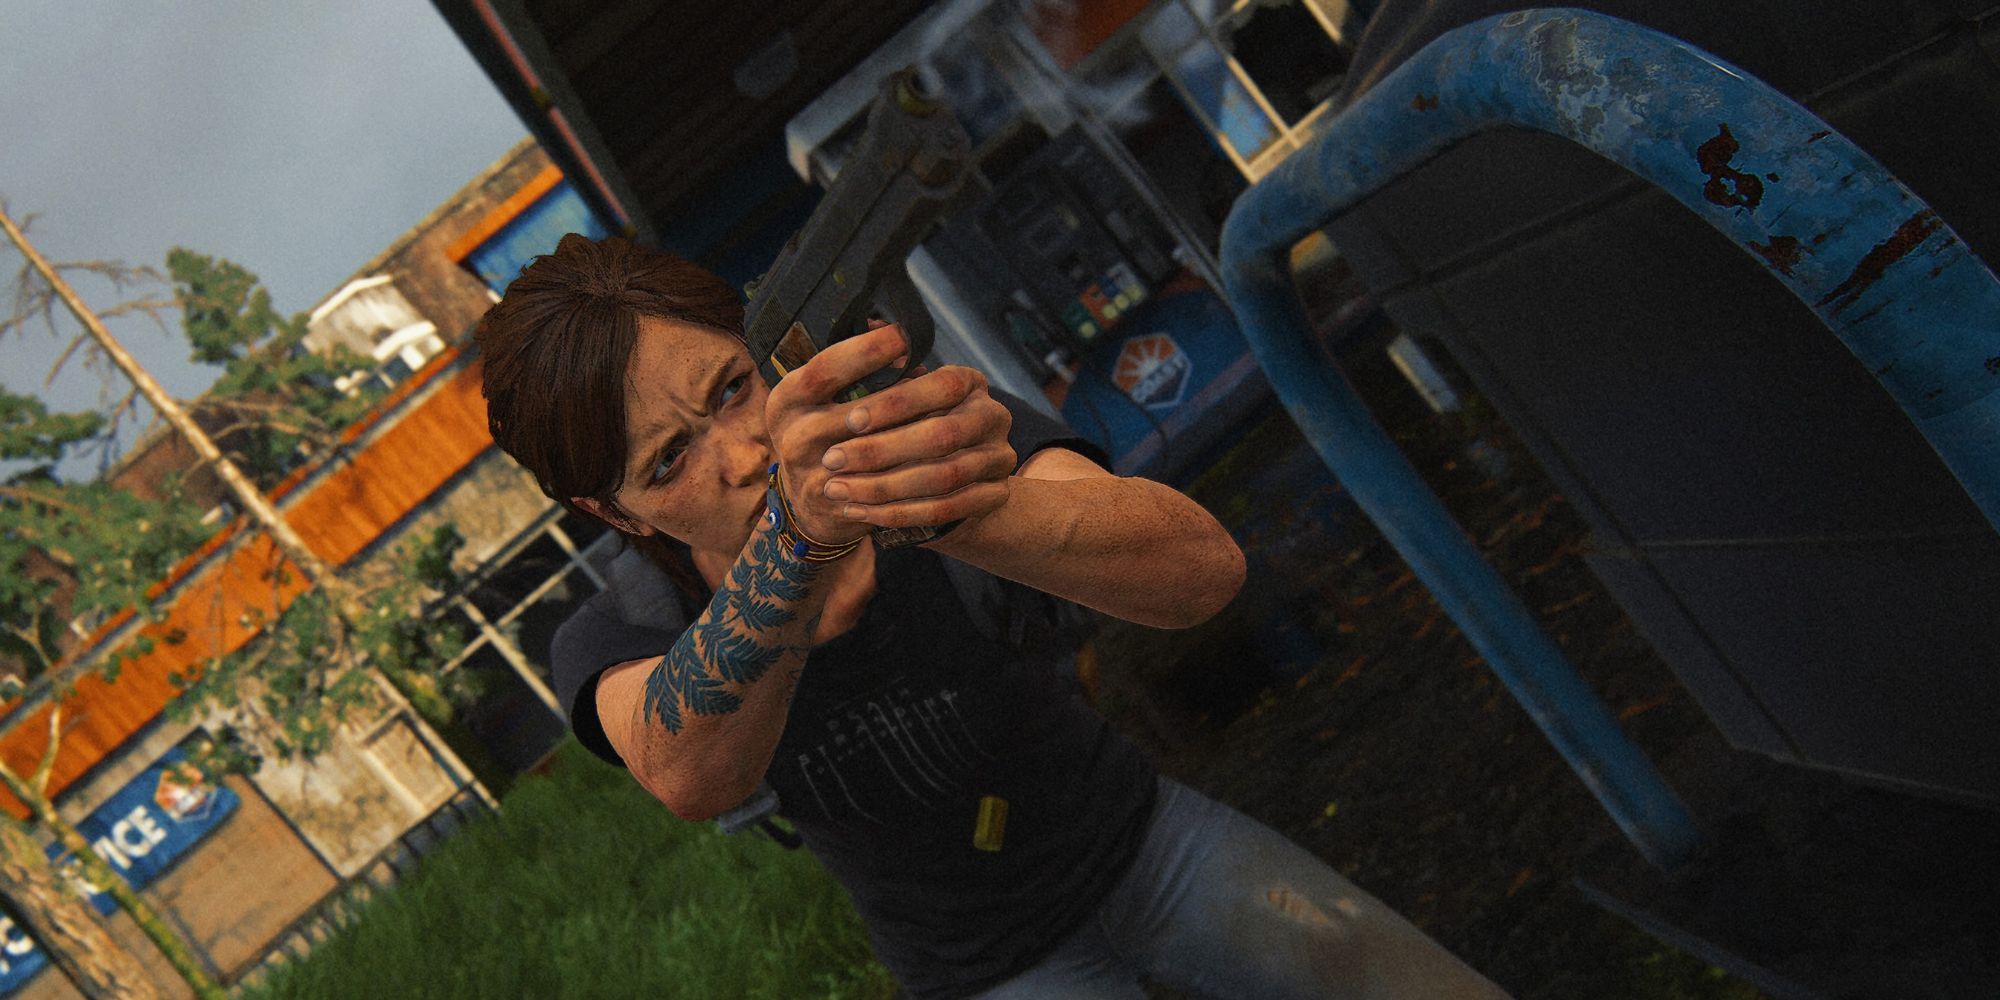 Ellie aiming a gun and showing off her tattoo in The Last of Us Part 2 Remastered.